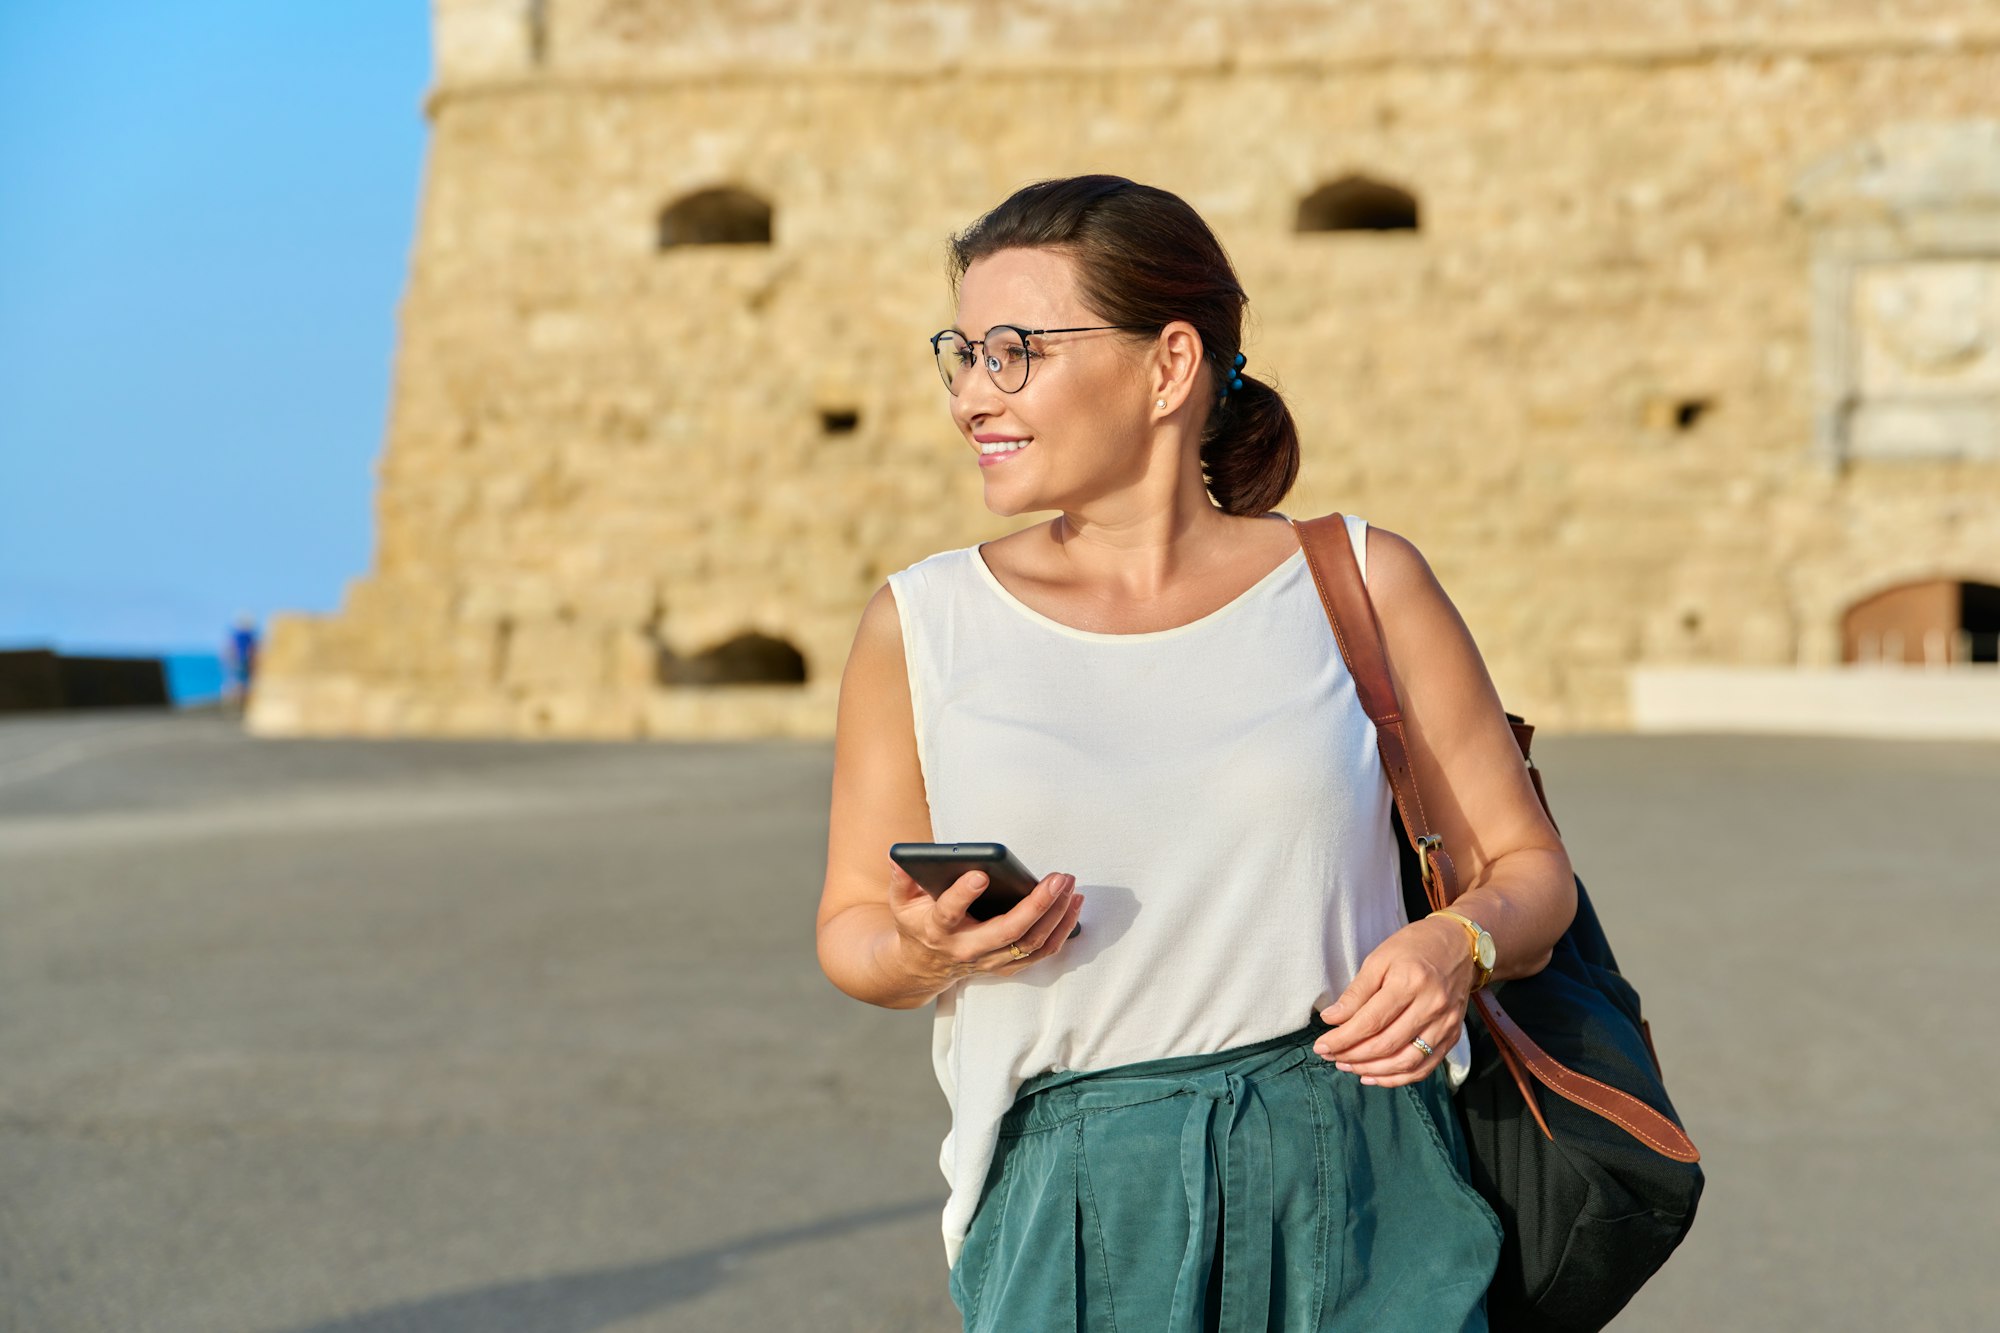 Outdoor portrait of smiling middle-aged woman walking through an old town